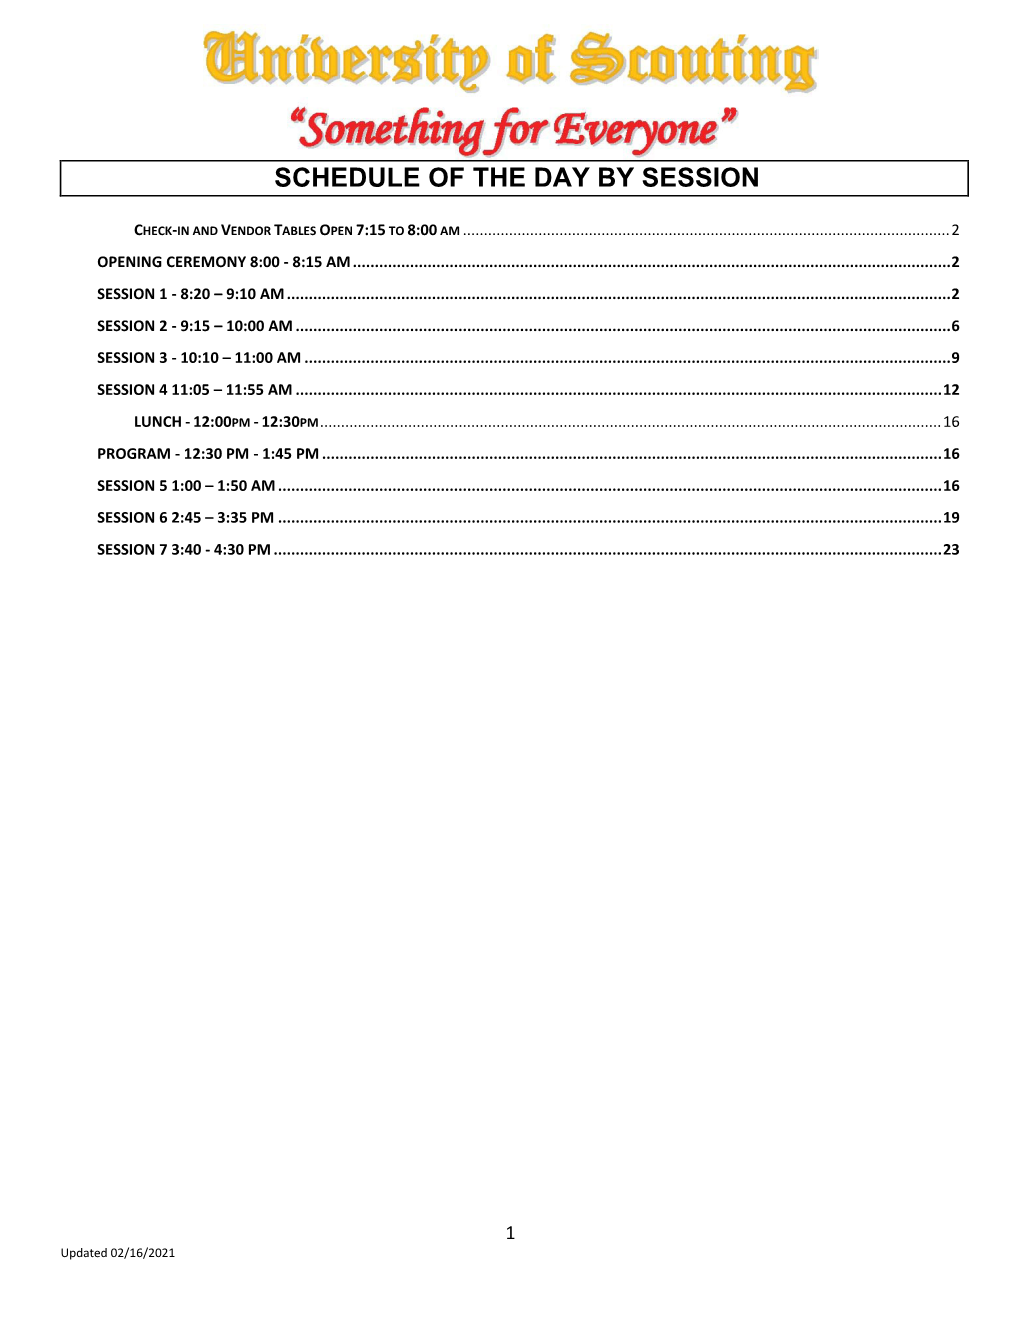 Schedule of the Day by Session